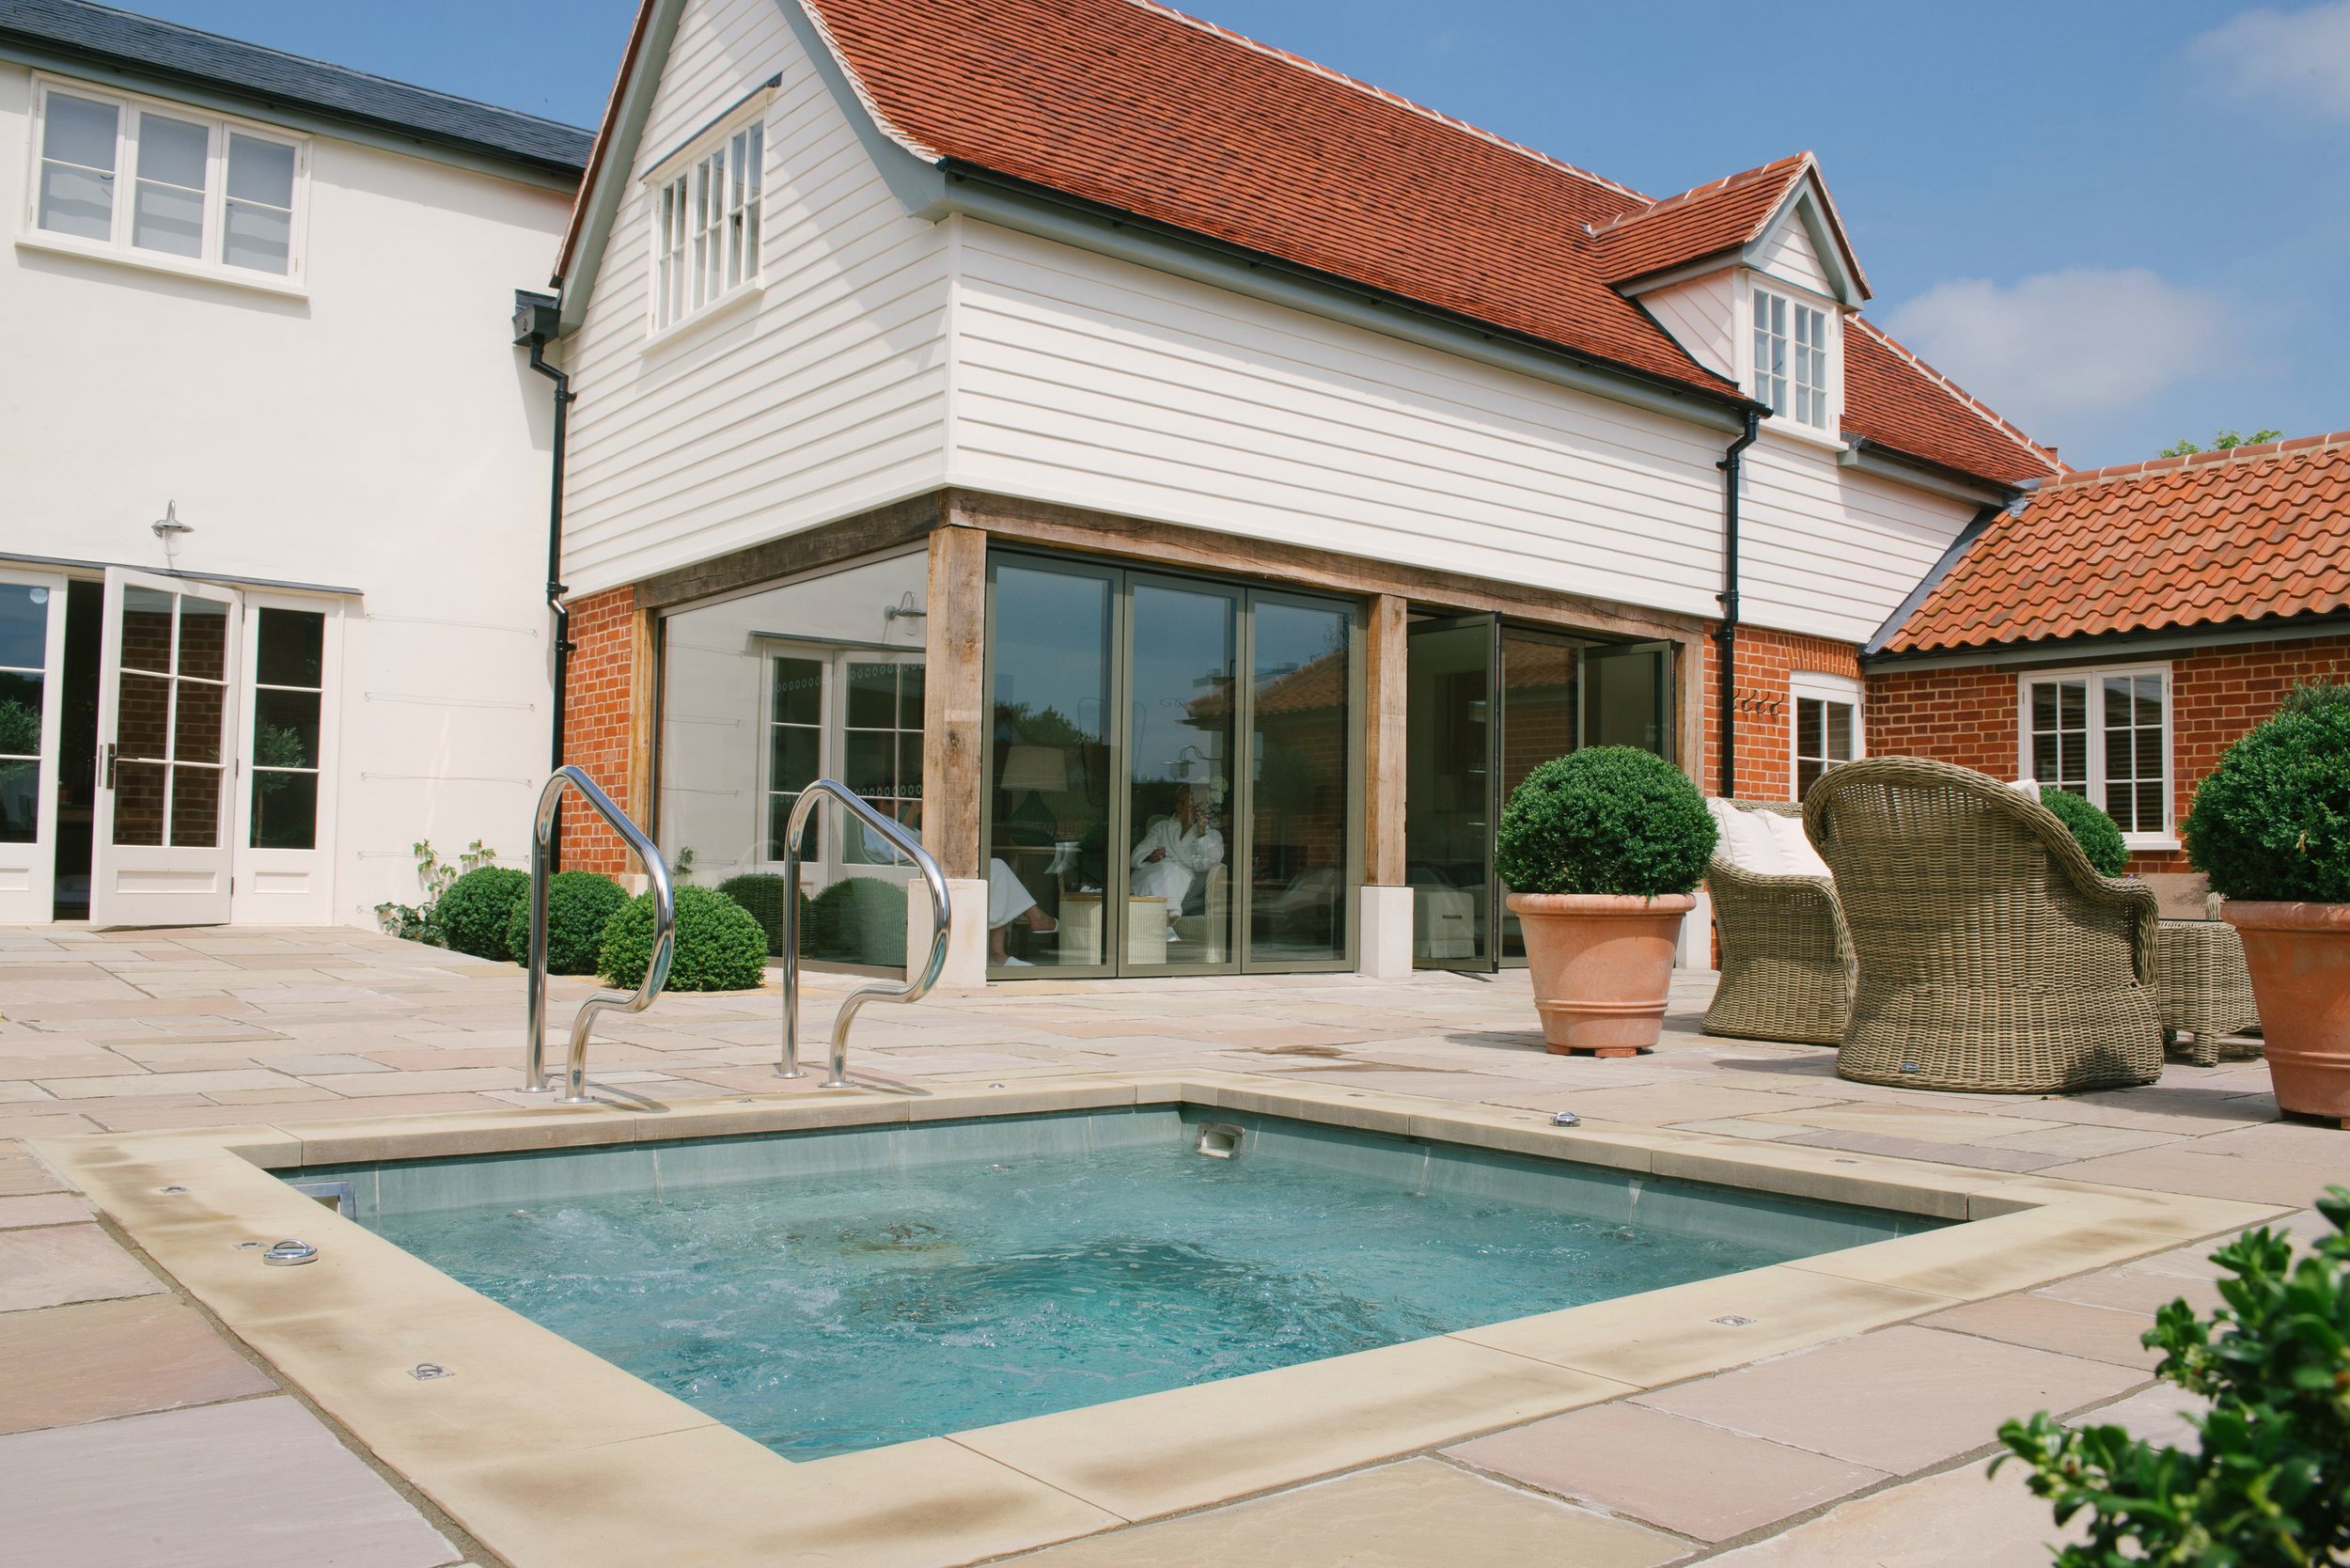 Hotel Review: The Swan Hotel & Spa at Lavenham | UK